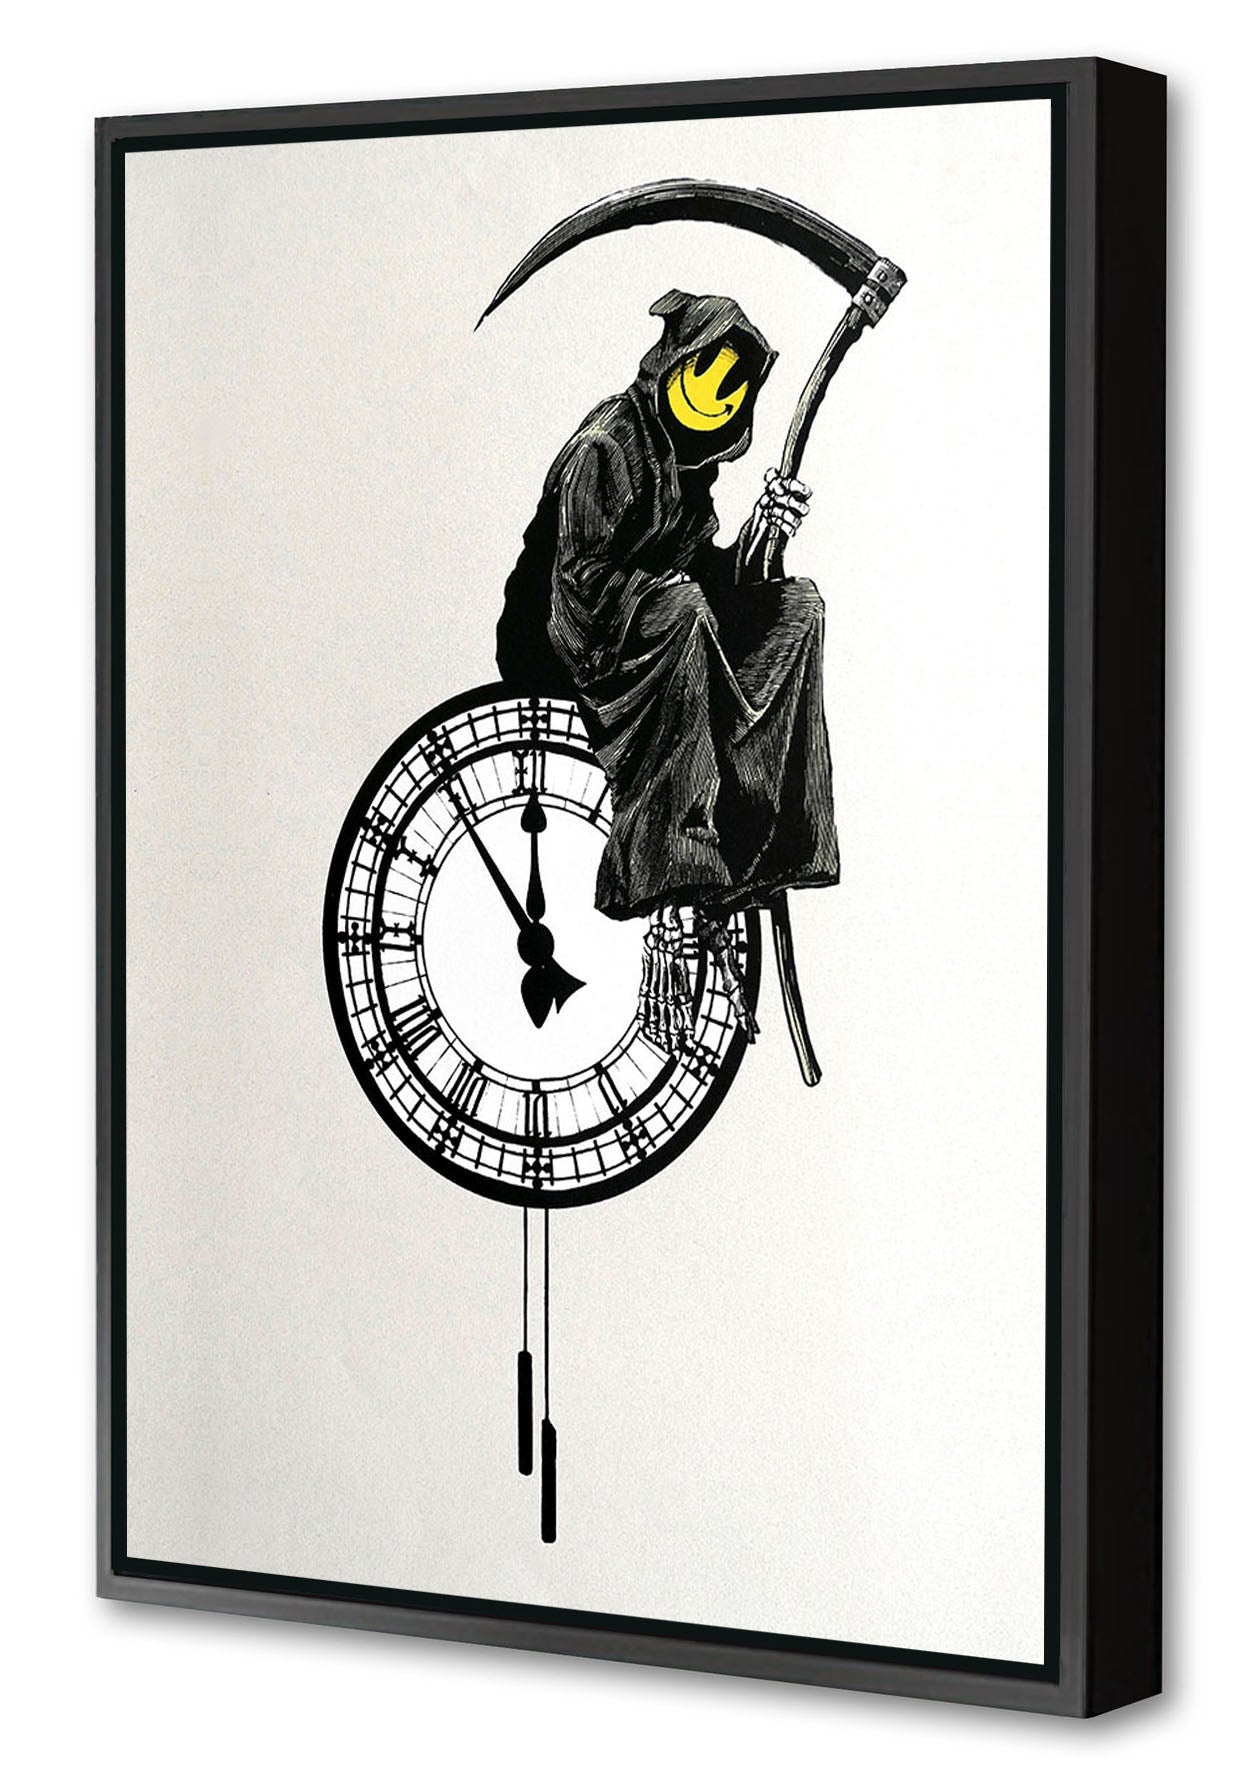 Grin Reaper-banksy, print-Canvas Print with Box Frame-40 x 60 cm-BLUE SHAKER